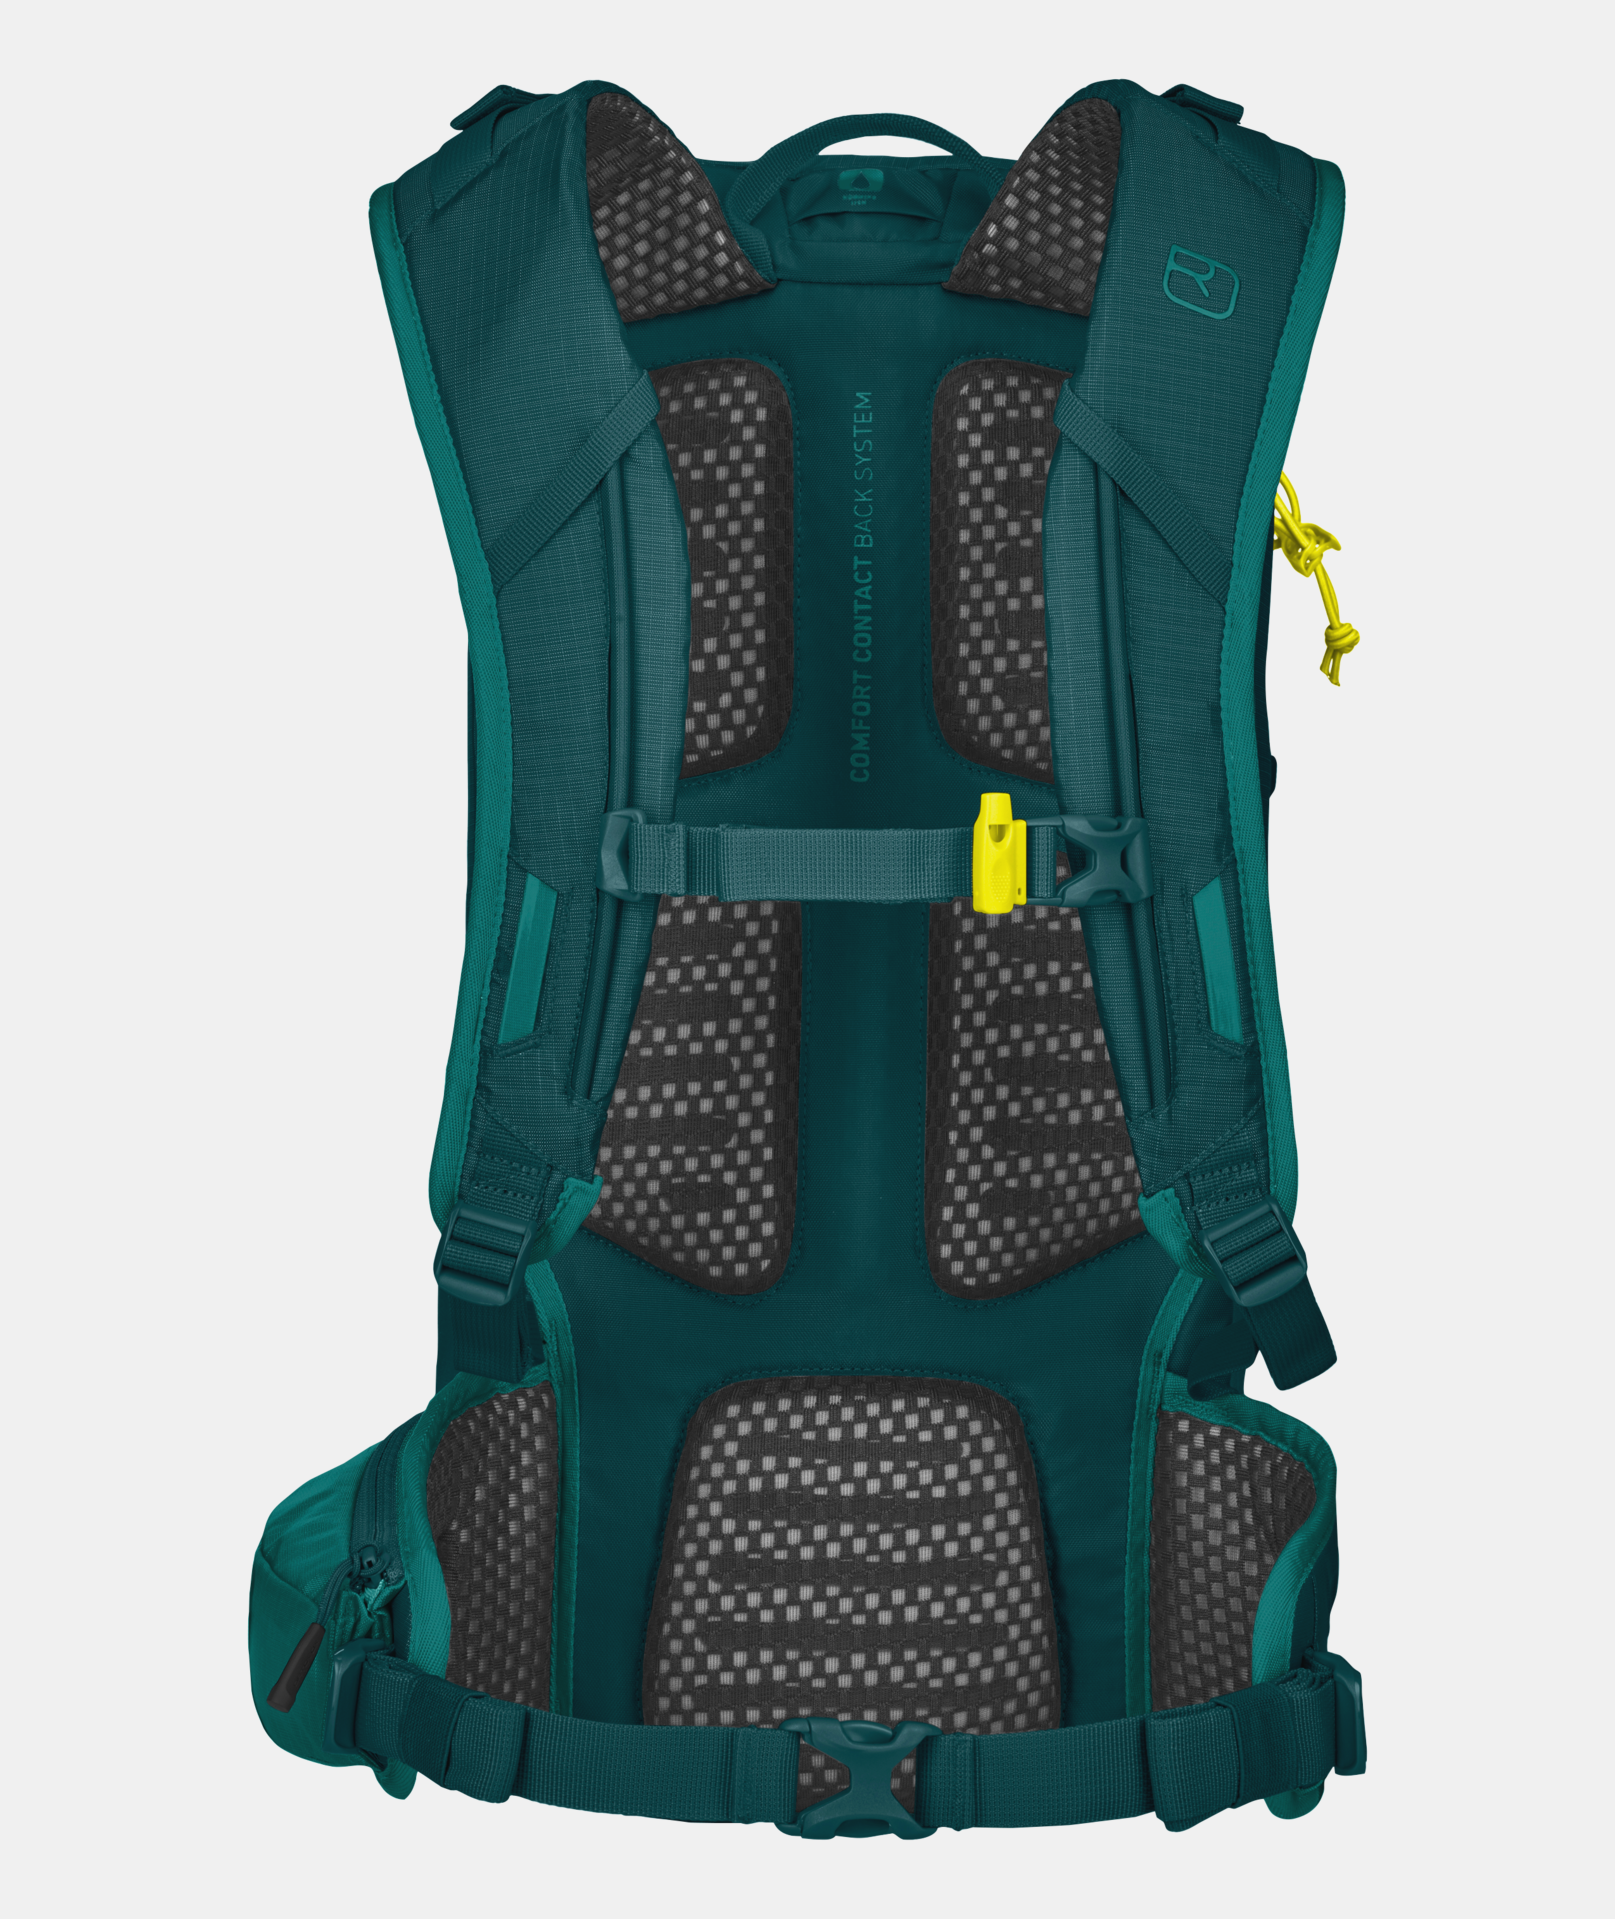 Ortovox Traverse 18 S Backpack